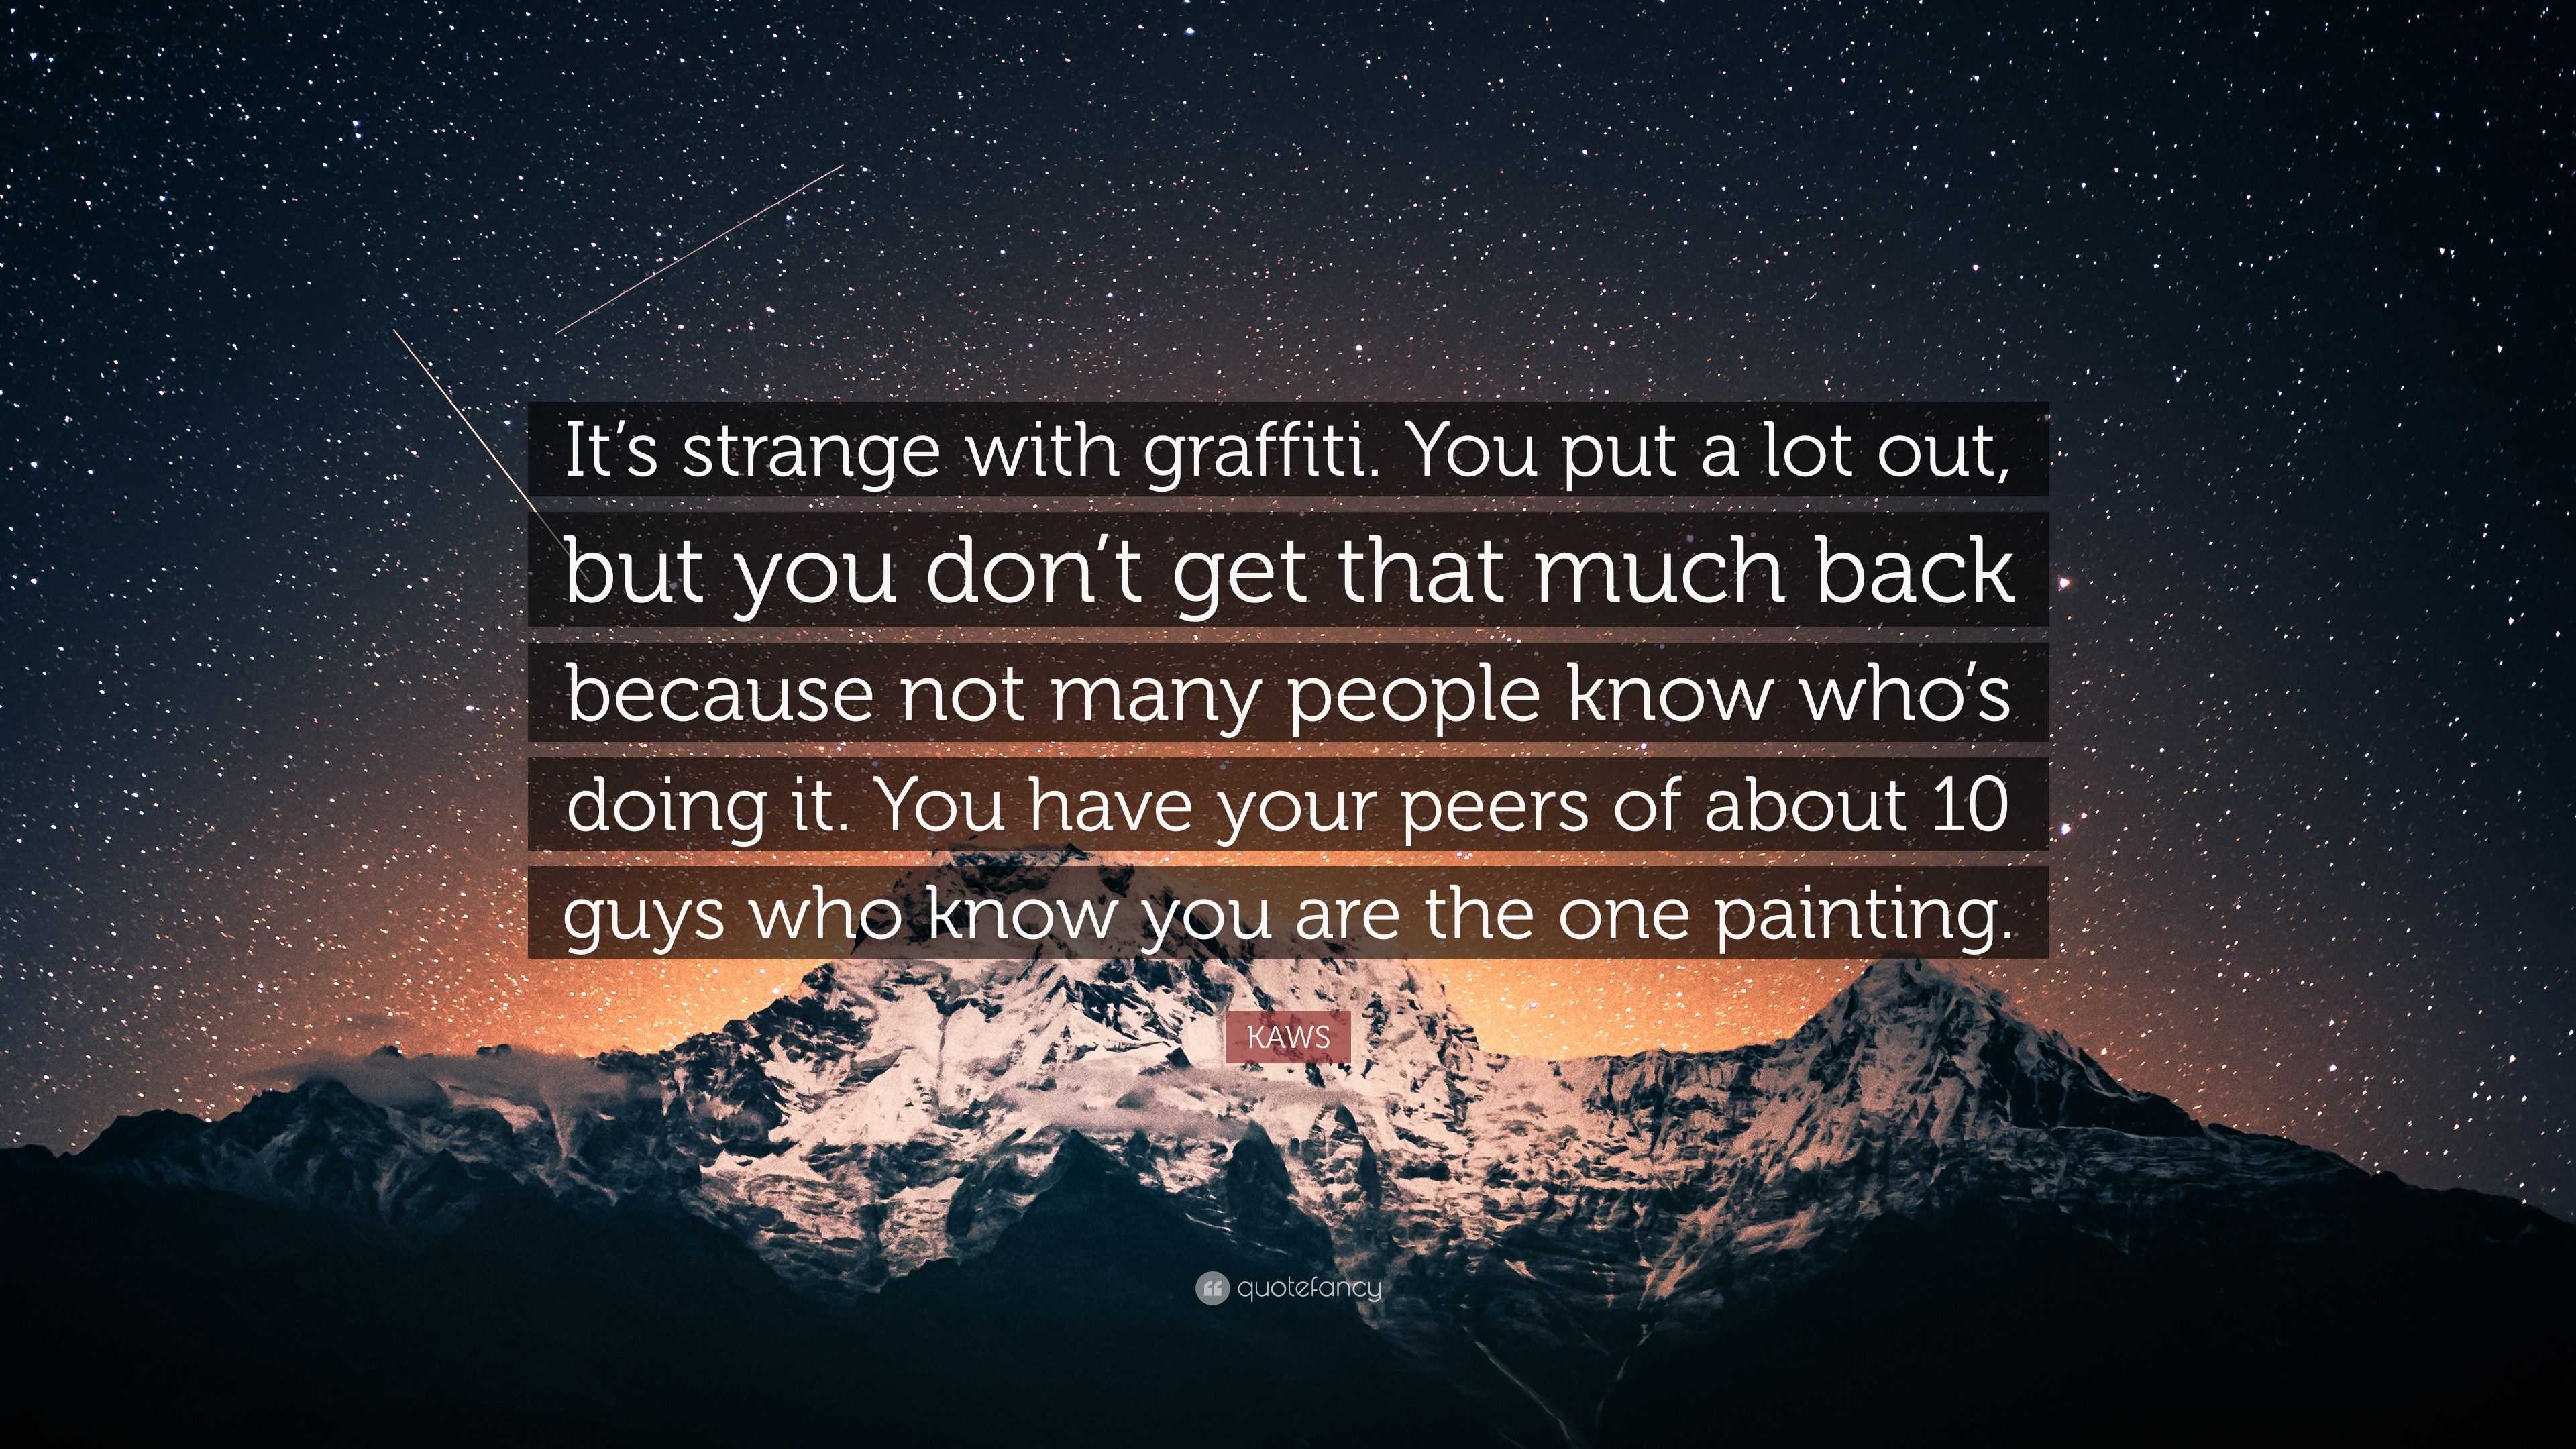 KAWS Quote: “It's strange with graffiti. You put a lot out, but you don't  get that much back because not many people know who's doing...”